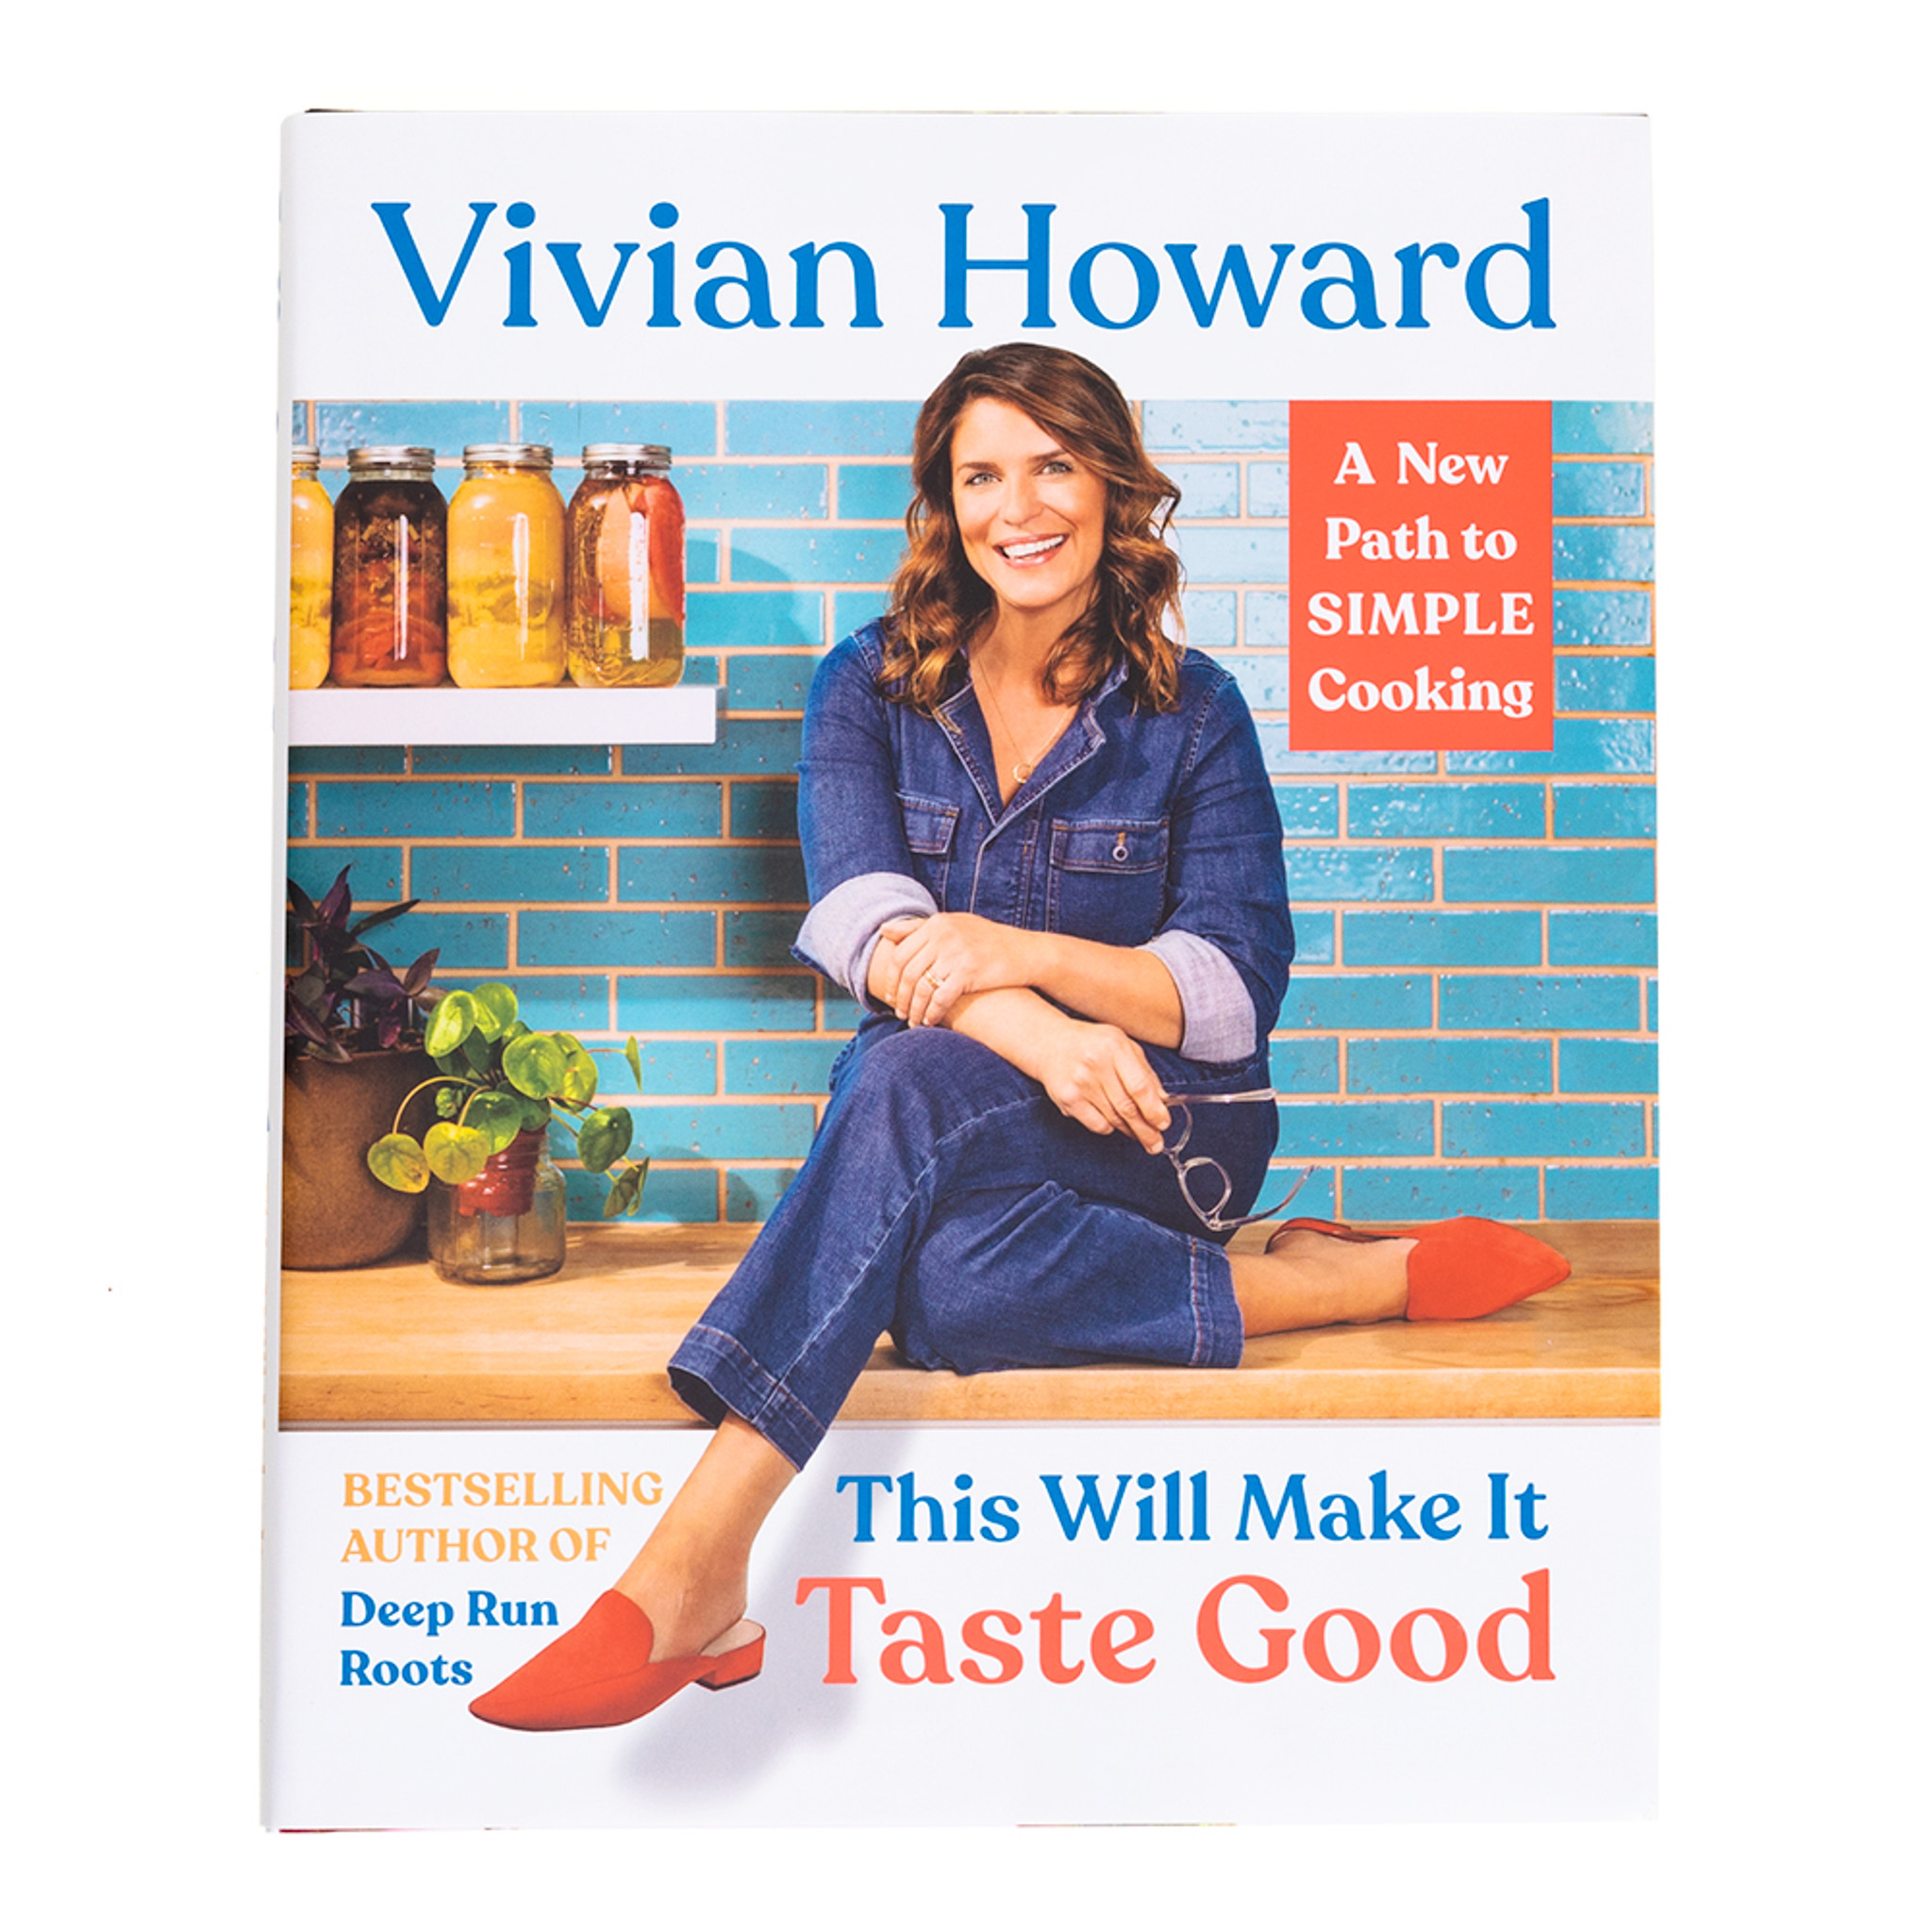 This Will Make It Taste Good: A New Path to Simple Cooking by Vivian Howard  | Oct 20, 2020 - Fieldshop by Garden & Gun